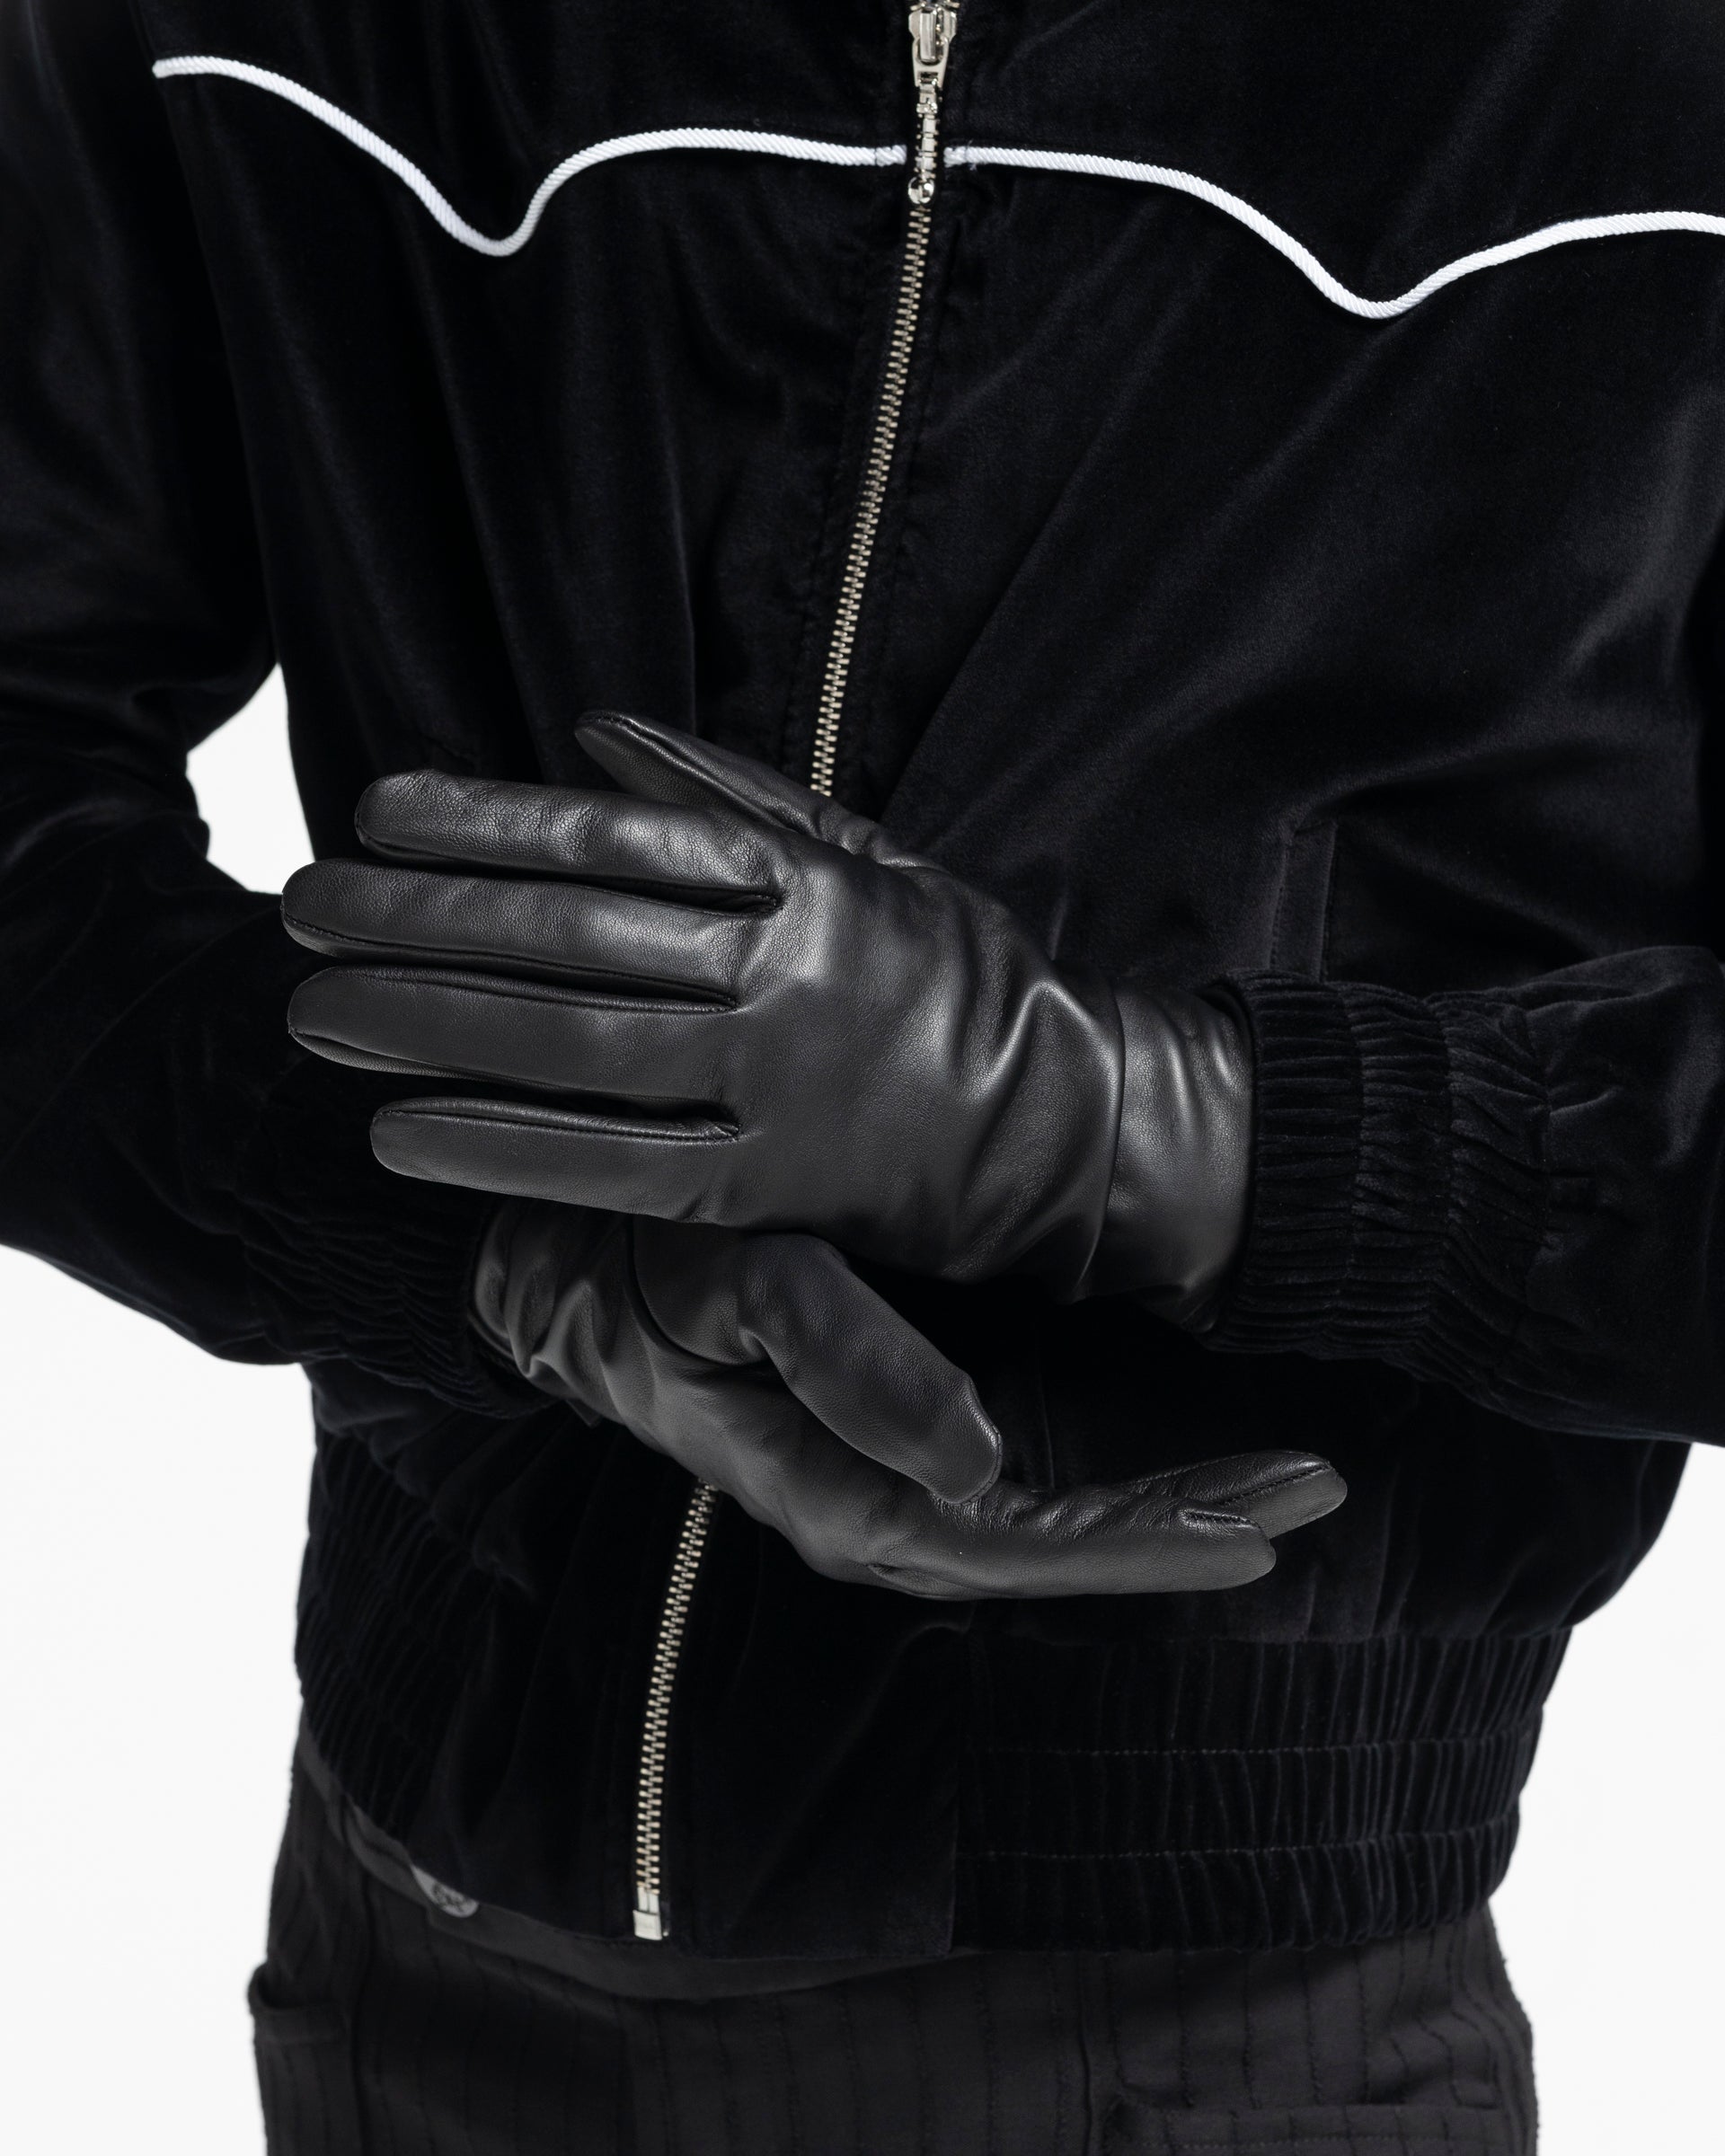 Leather Gloves in Black